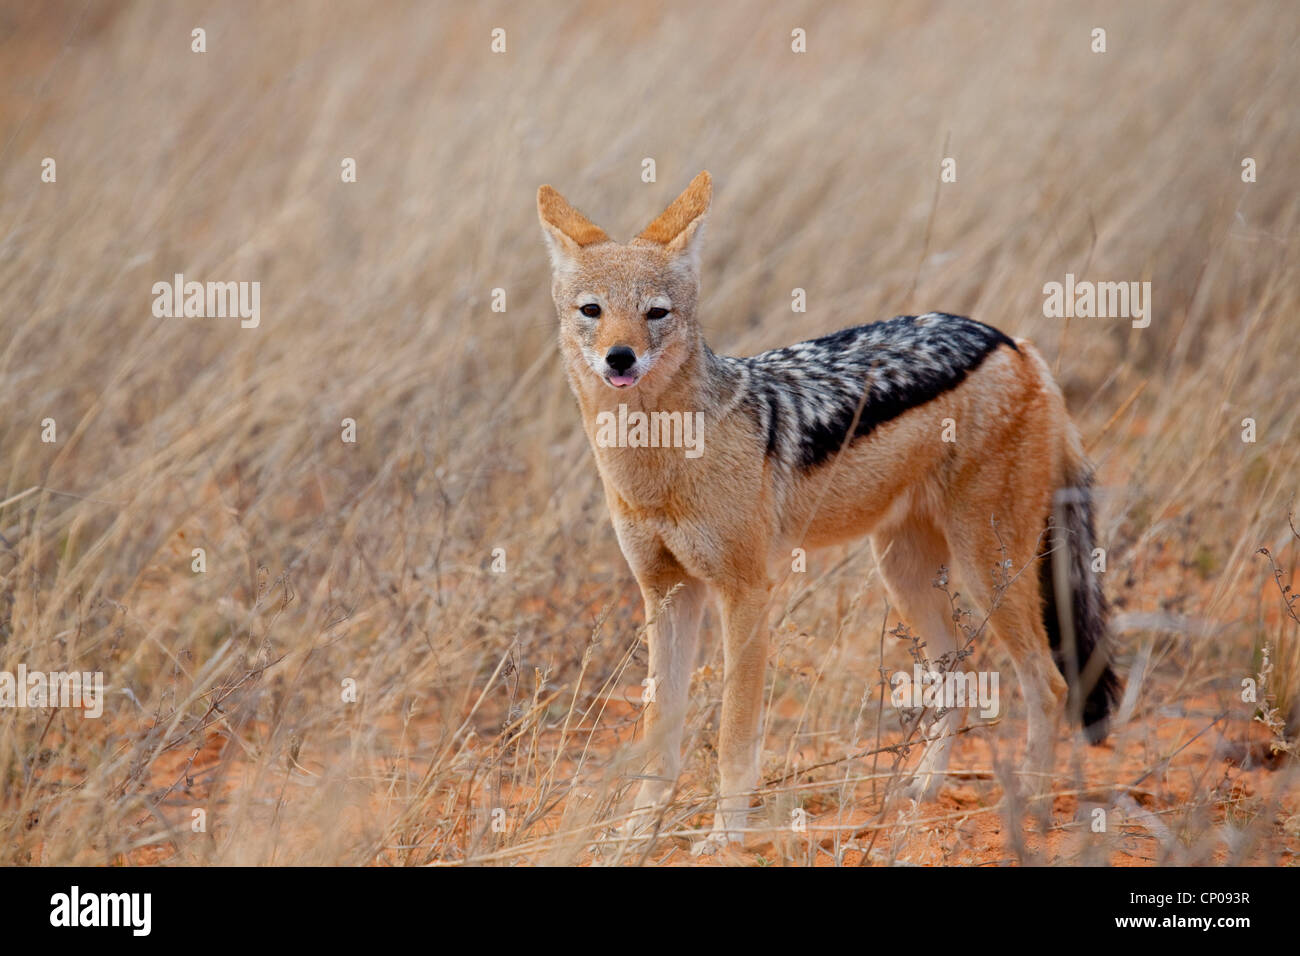 black-backed jackal (Canis mesomelas), standing, South Africa, Northern Cape, Kgalagadi Transfrontier National Park Stock Photo